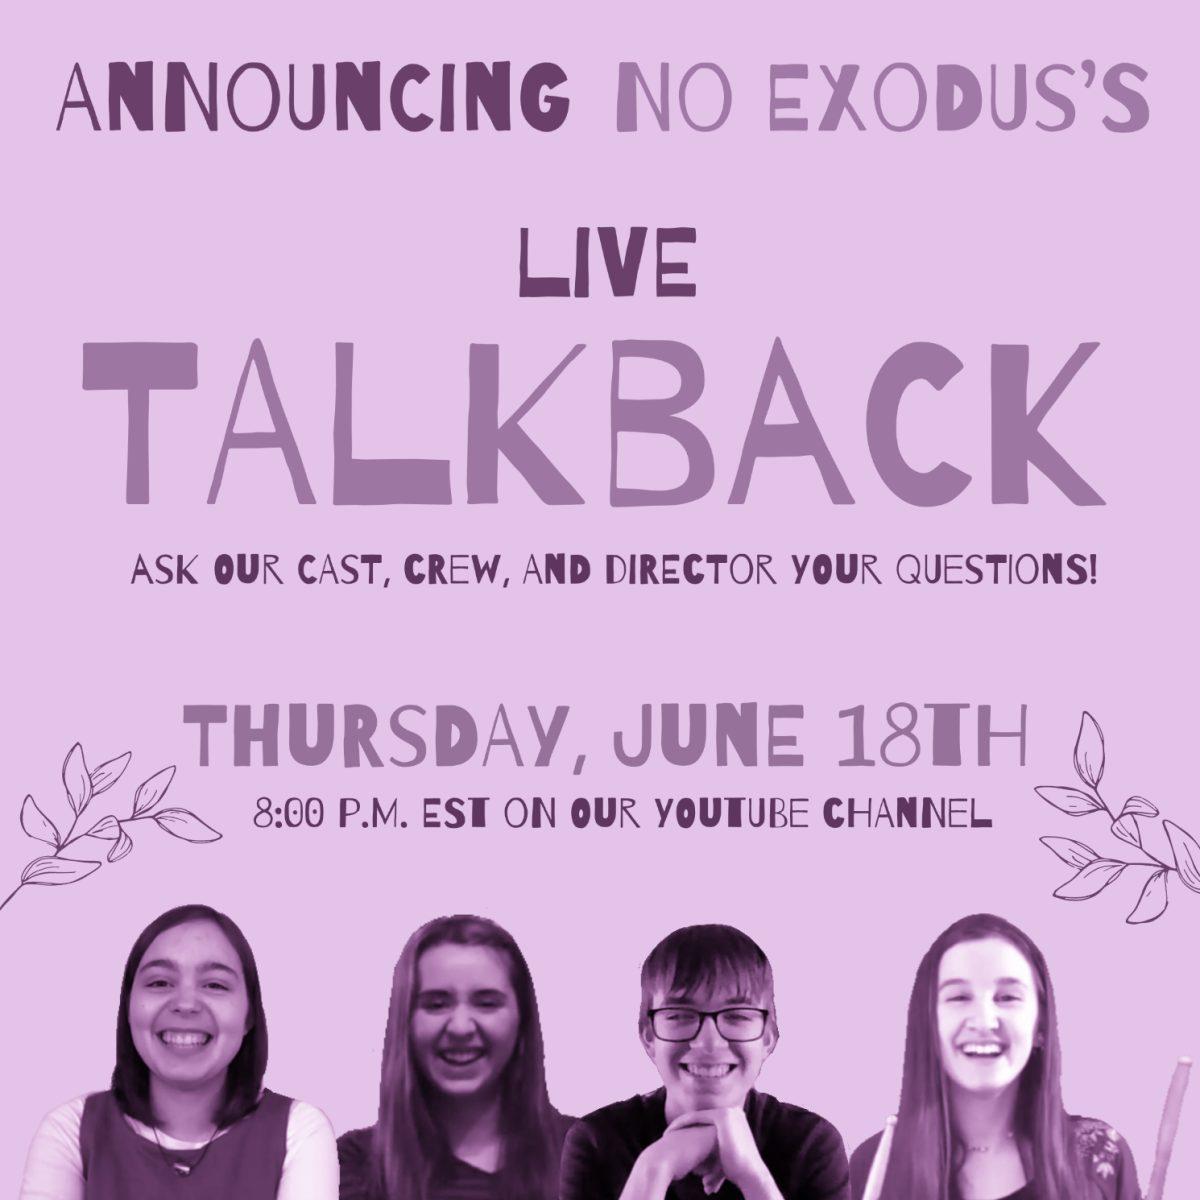 Cast+and+Crew+of+%E2%80%9CNo+Exodus%E2%80%9D+To+Hold+Live+Talkback+on+June+18